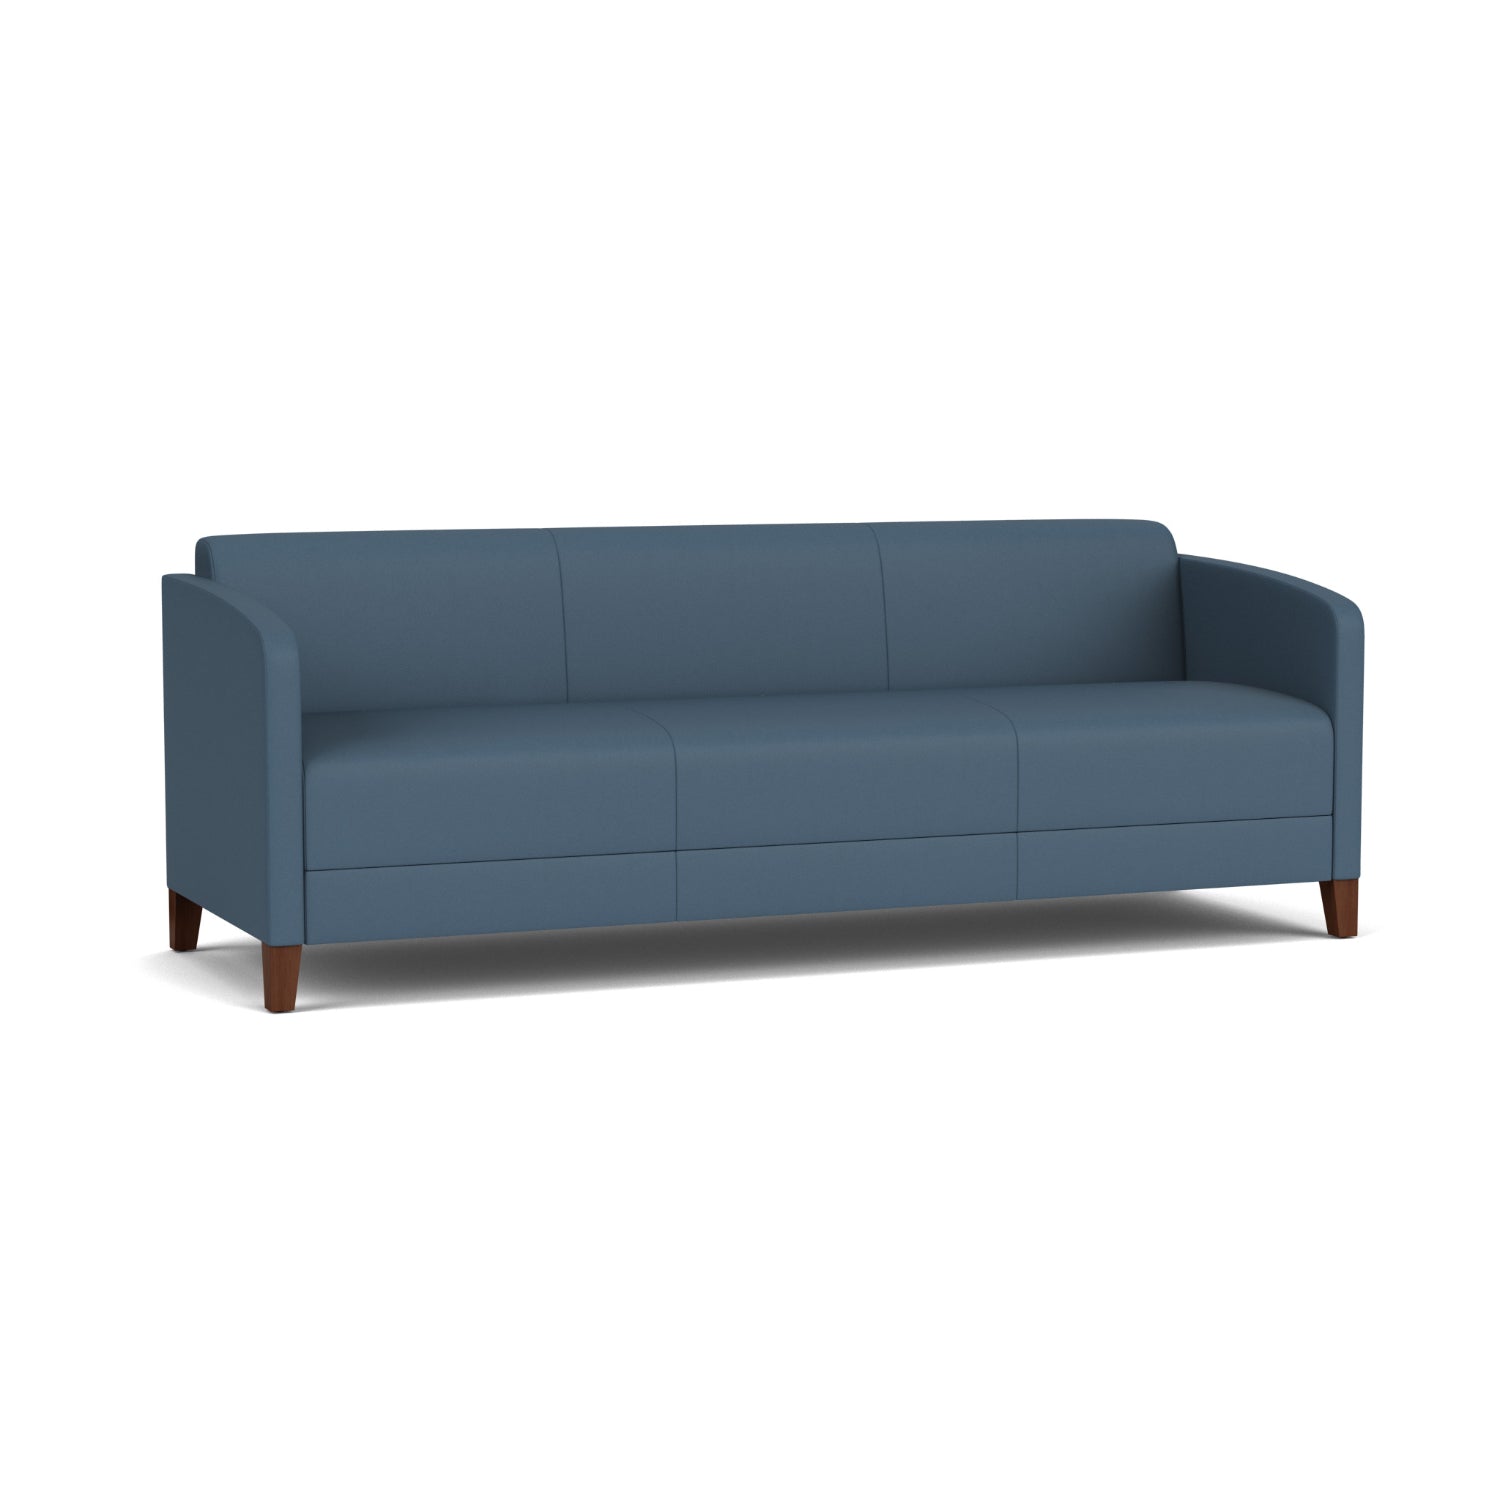 Fremont Collection Reception Seating, Sofa, Standard Vinyl Upholstery, FREE SHIPPING